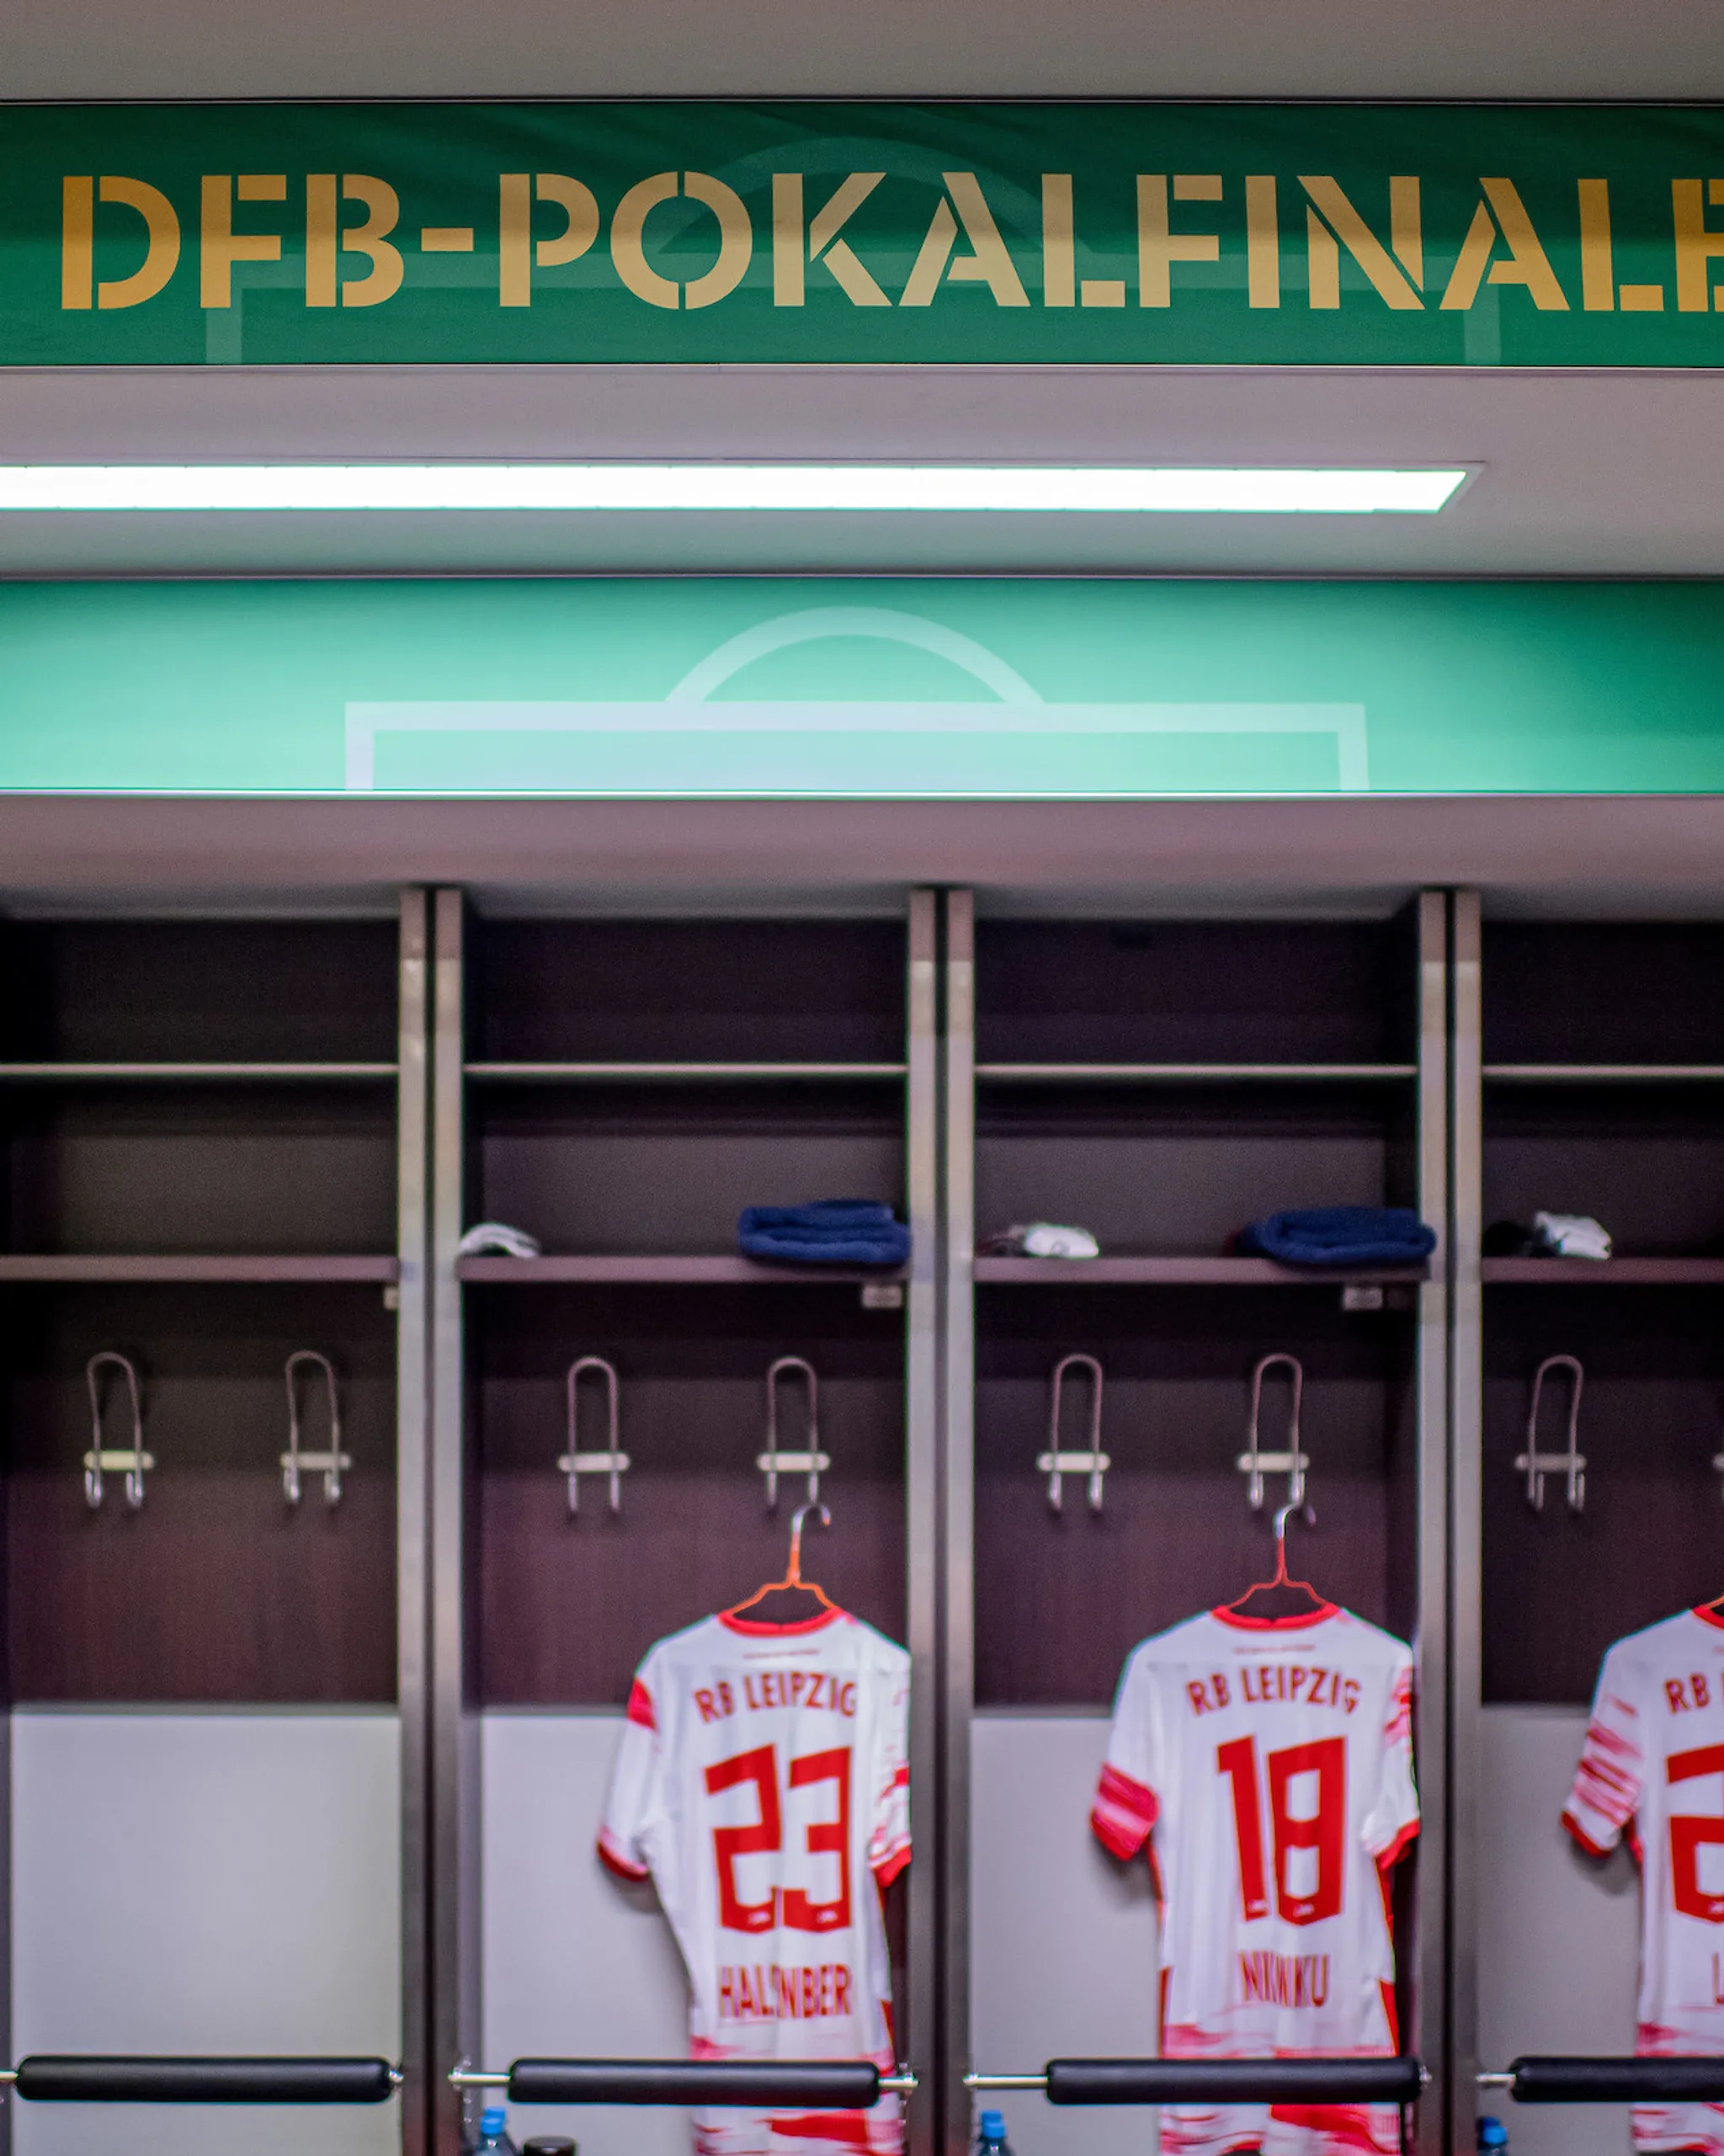 The numbers ahead of the DFB-Pokal final